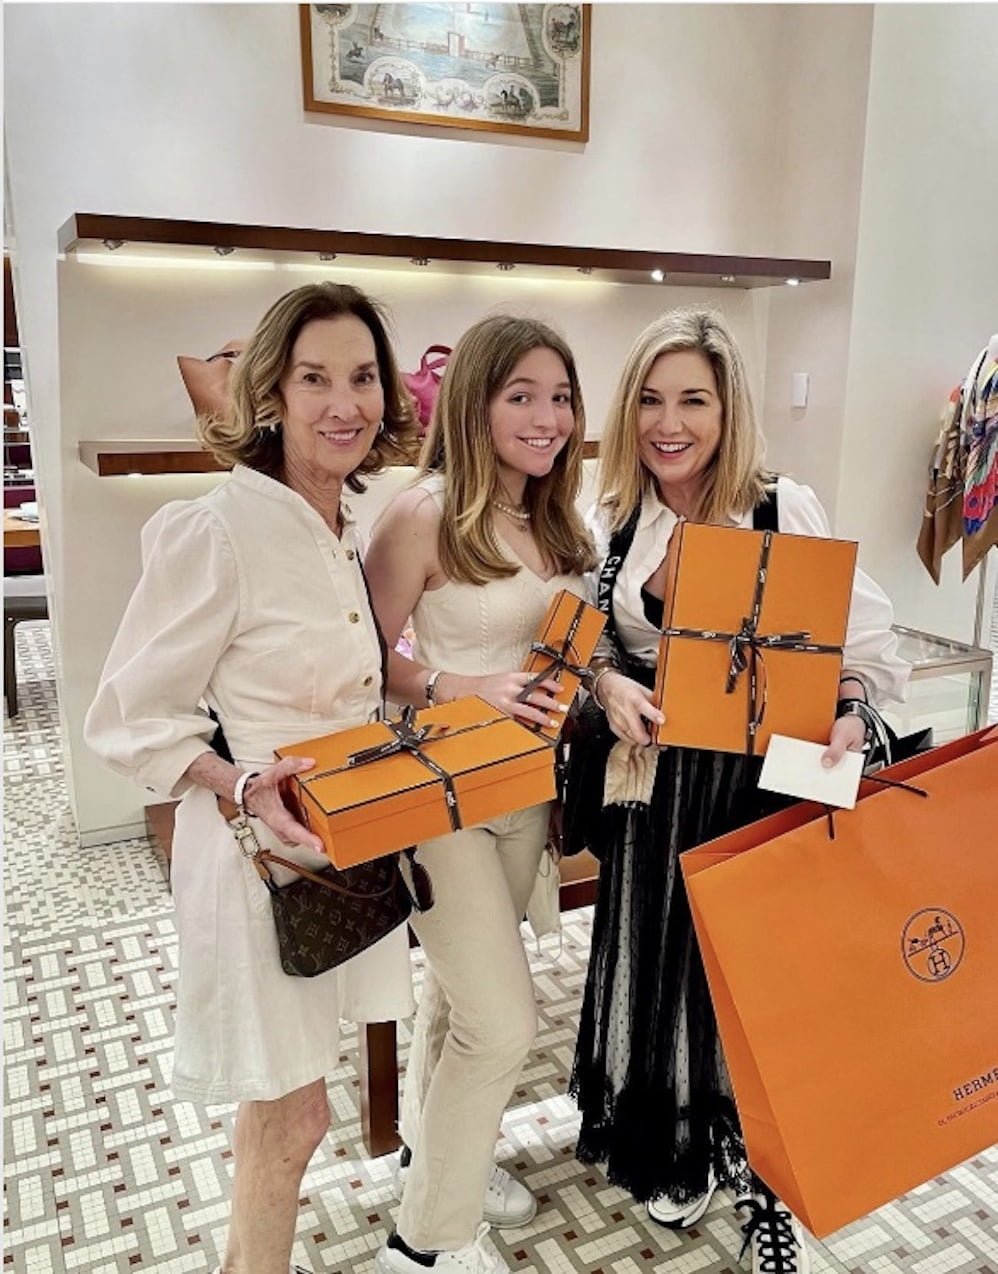 Hermes designer defends high prices, insists cost is 'good' if you